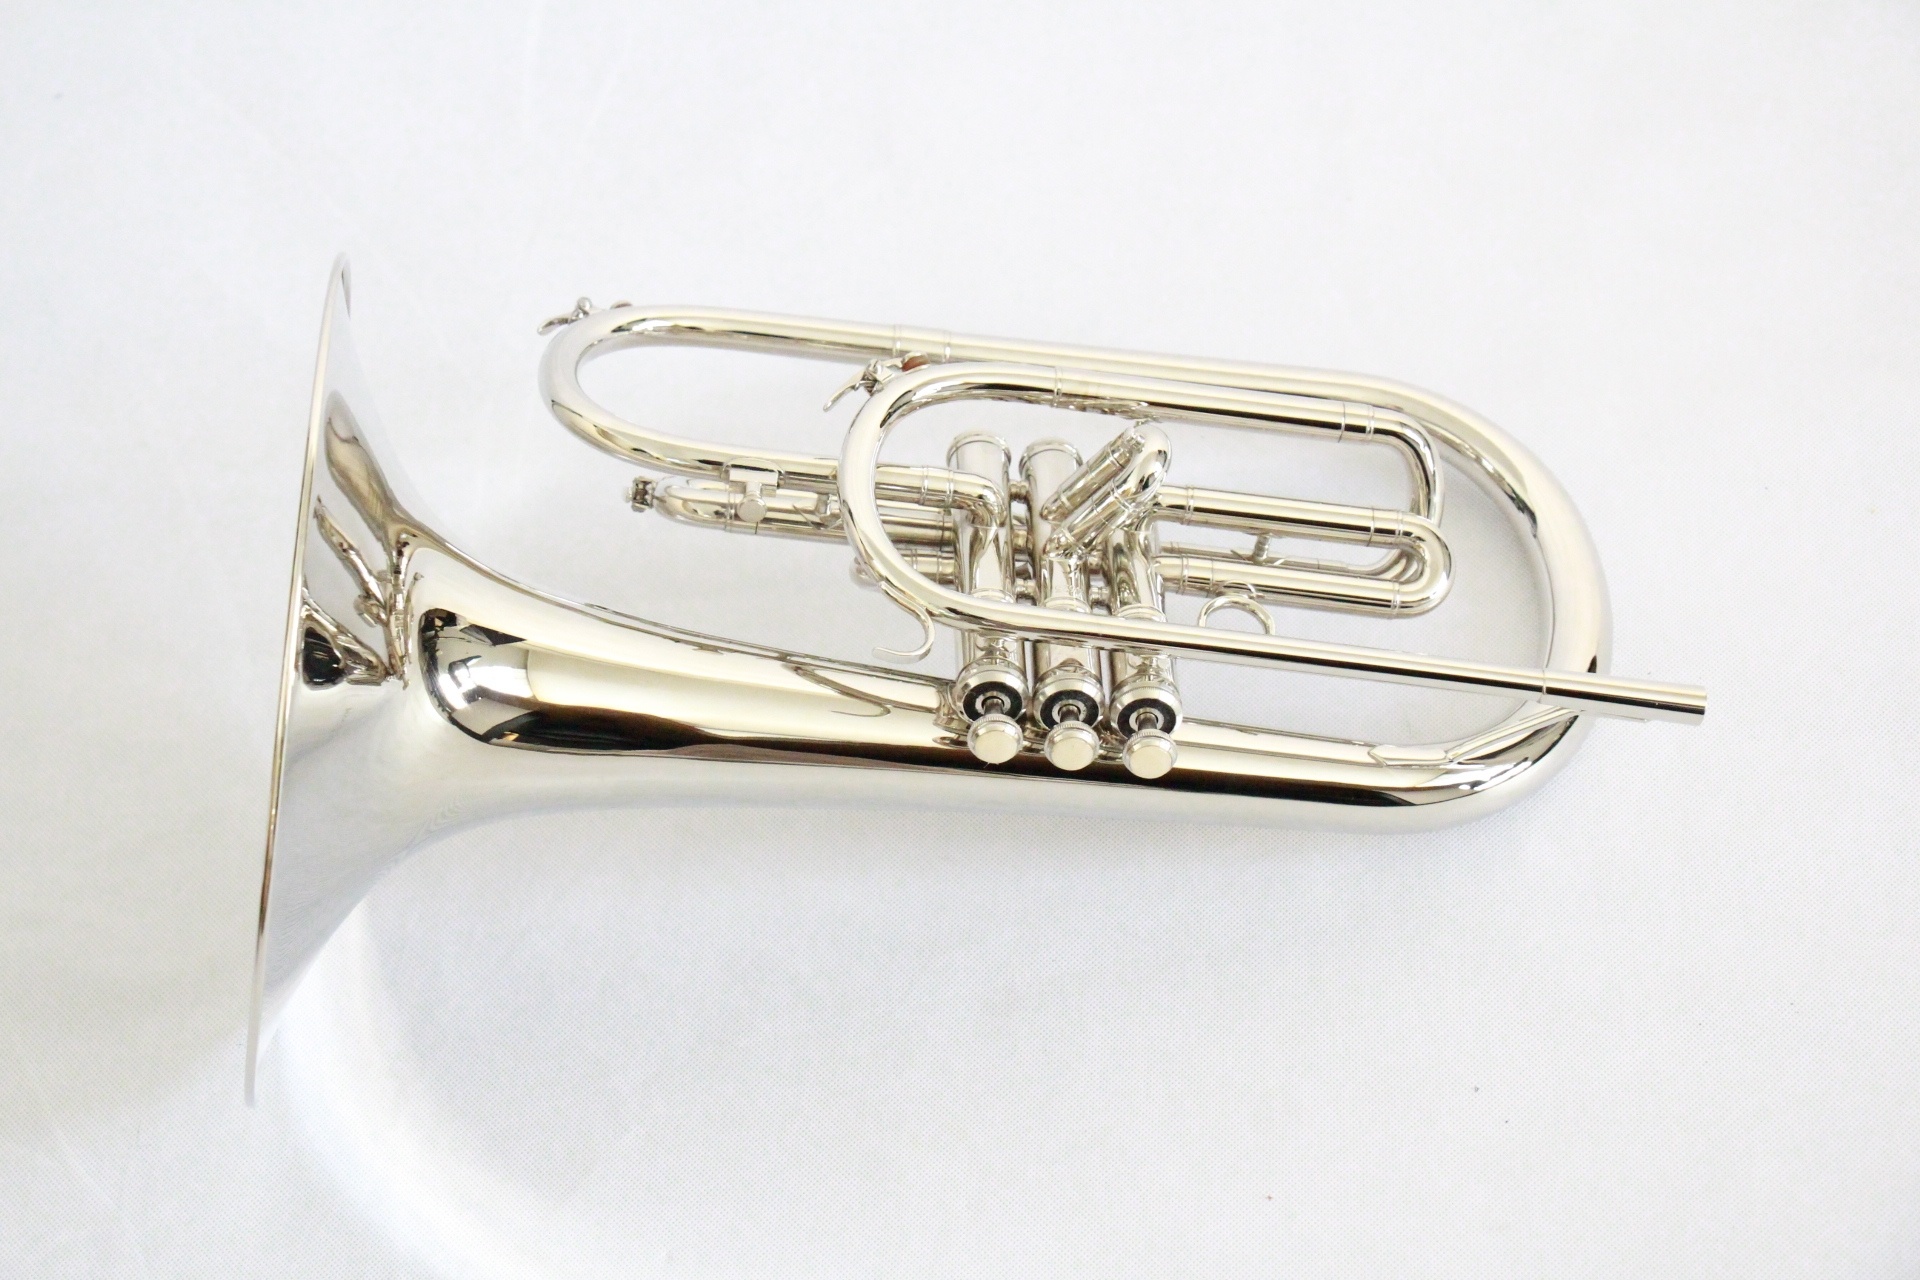 Mellophone: Nickel Plated Marching Labrophones, Sympathetic Vibration Of Air, Tubular Resonator, Brass Nickel Plated Bb Tone Marching Instrument. 1920x1280 HD Wallpaper.